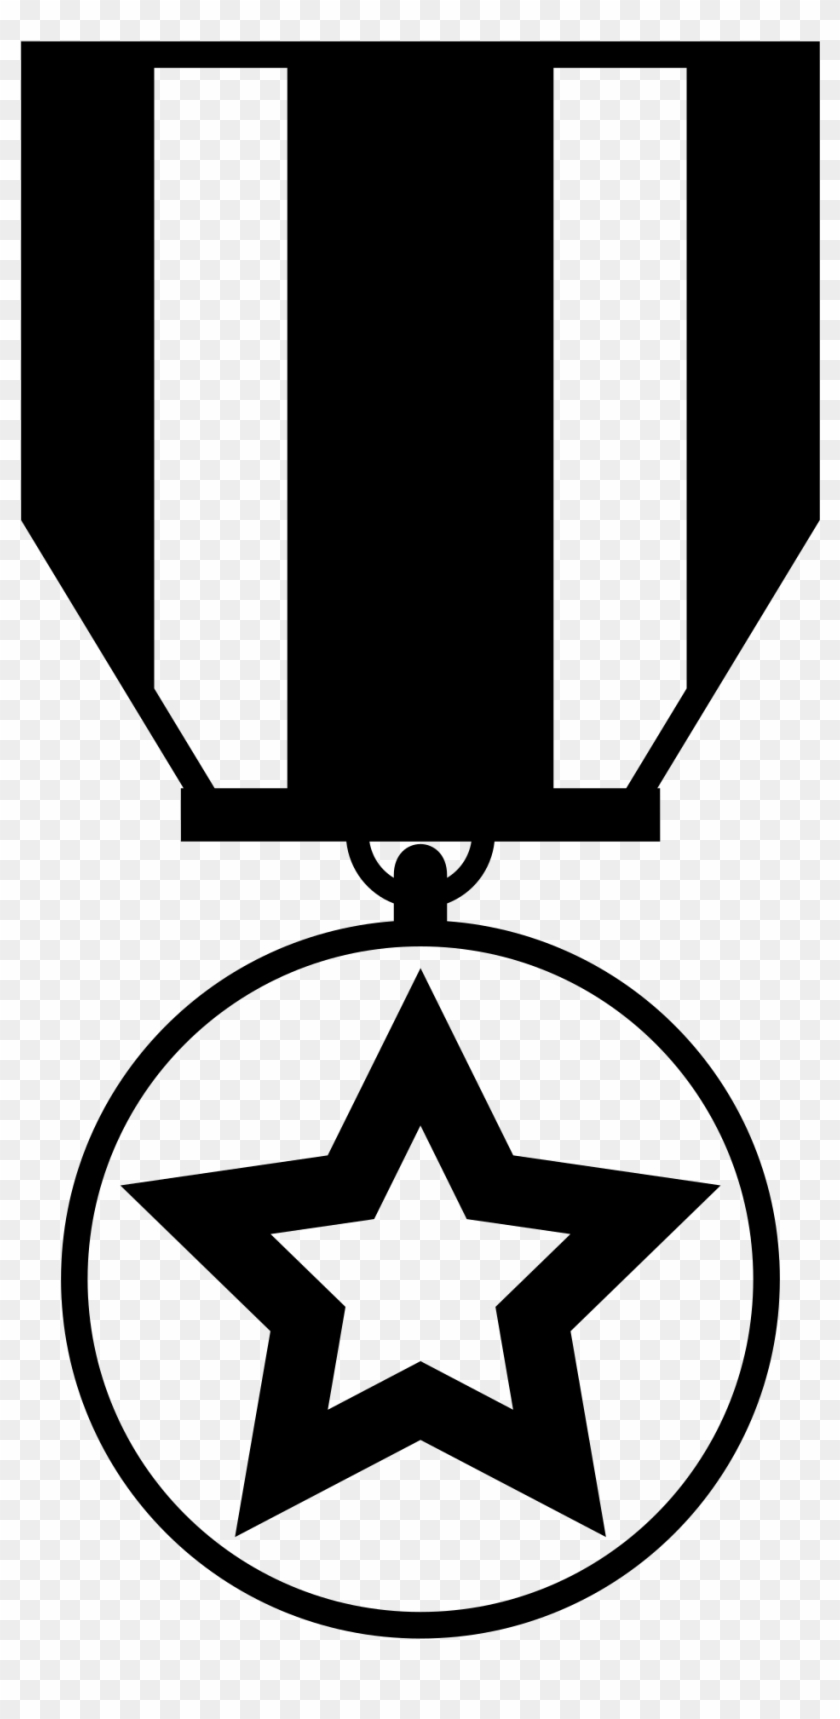 Open - Military Medal Clip Art Black And White #1668672